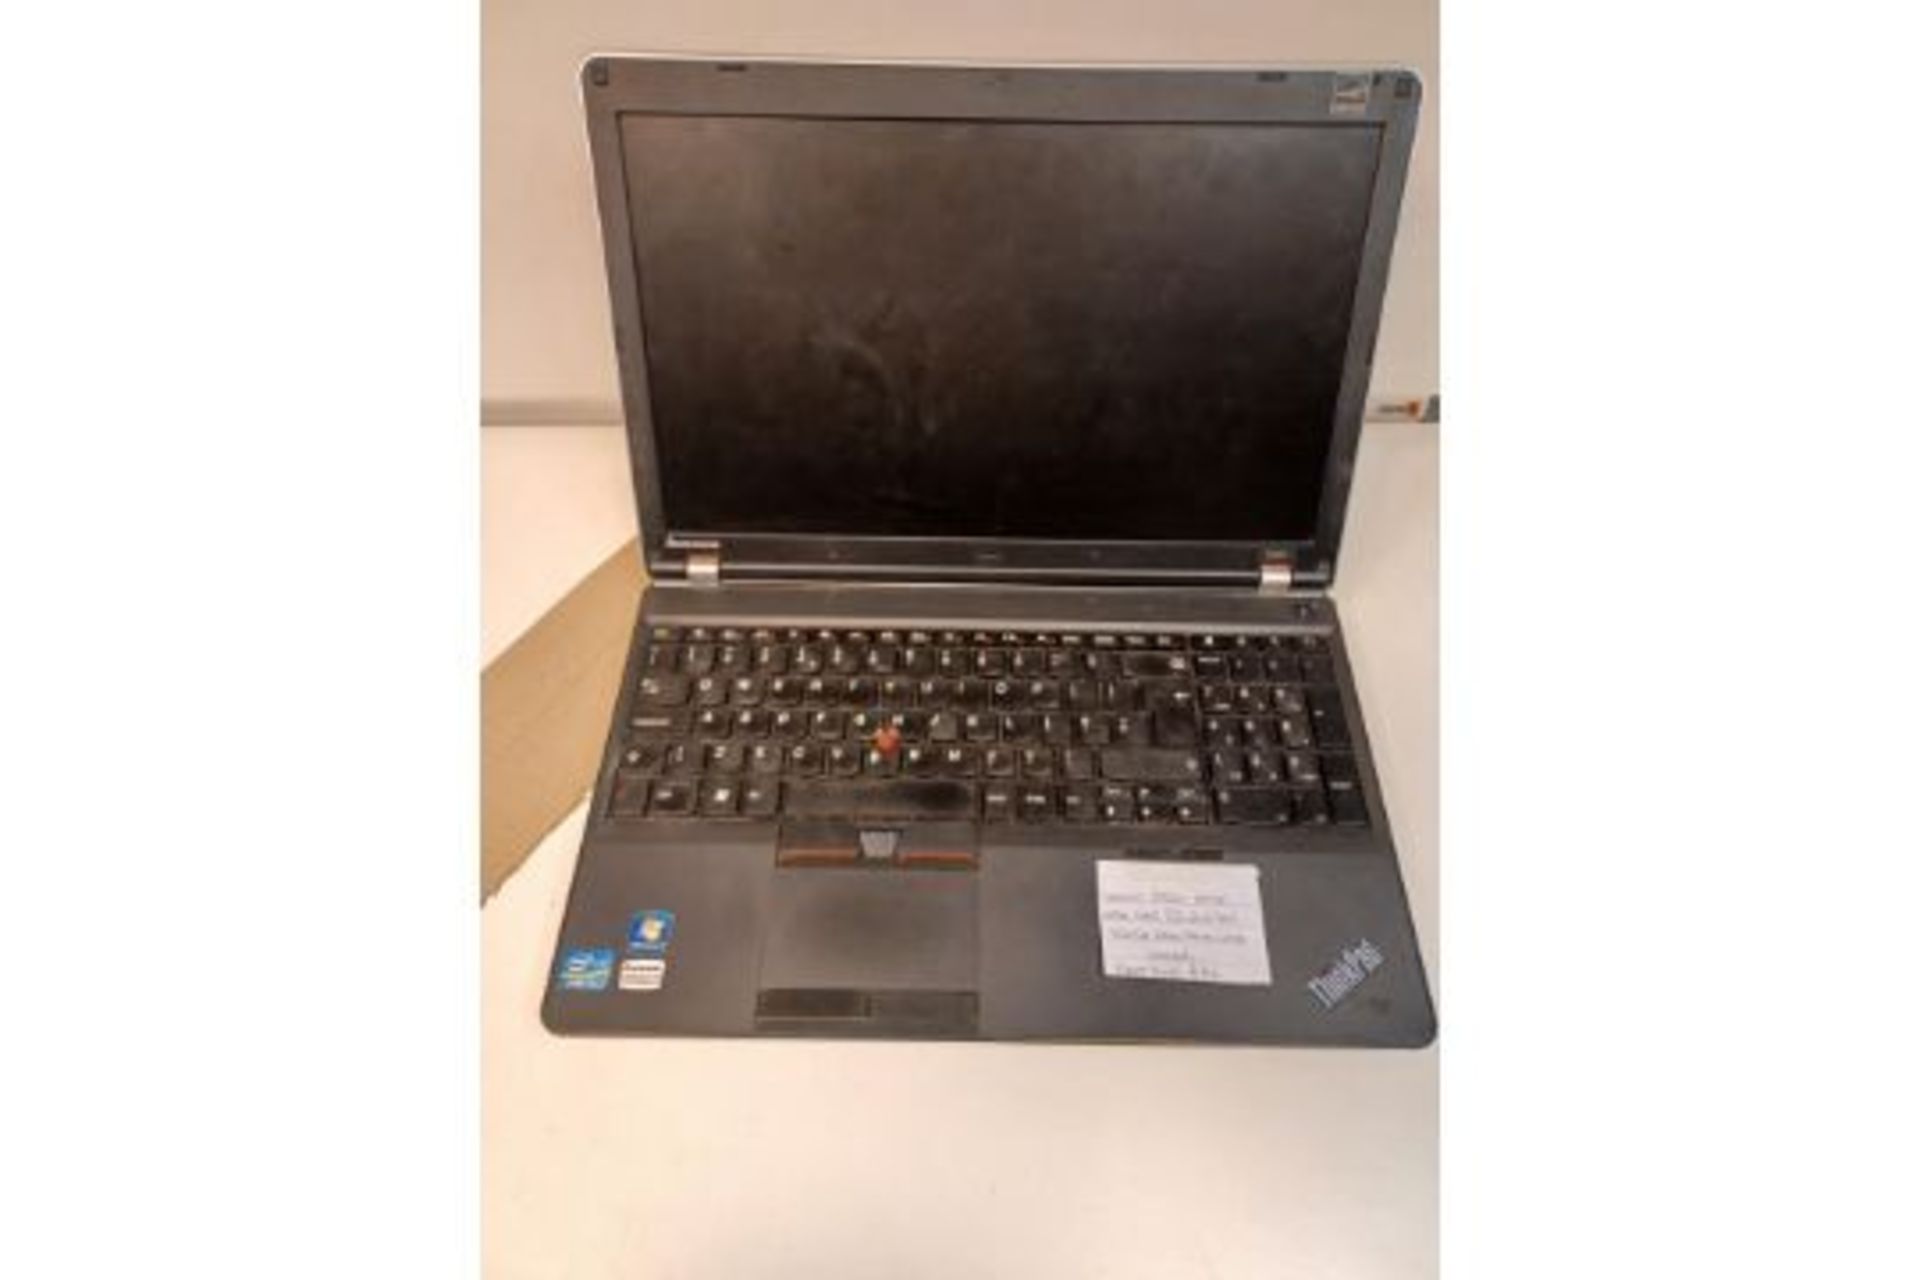 LENOVO E520 LAPTOP INTEL CORE I3 2ND GEN 320GB HARD DRIVE WITH CHARGER (26)